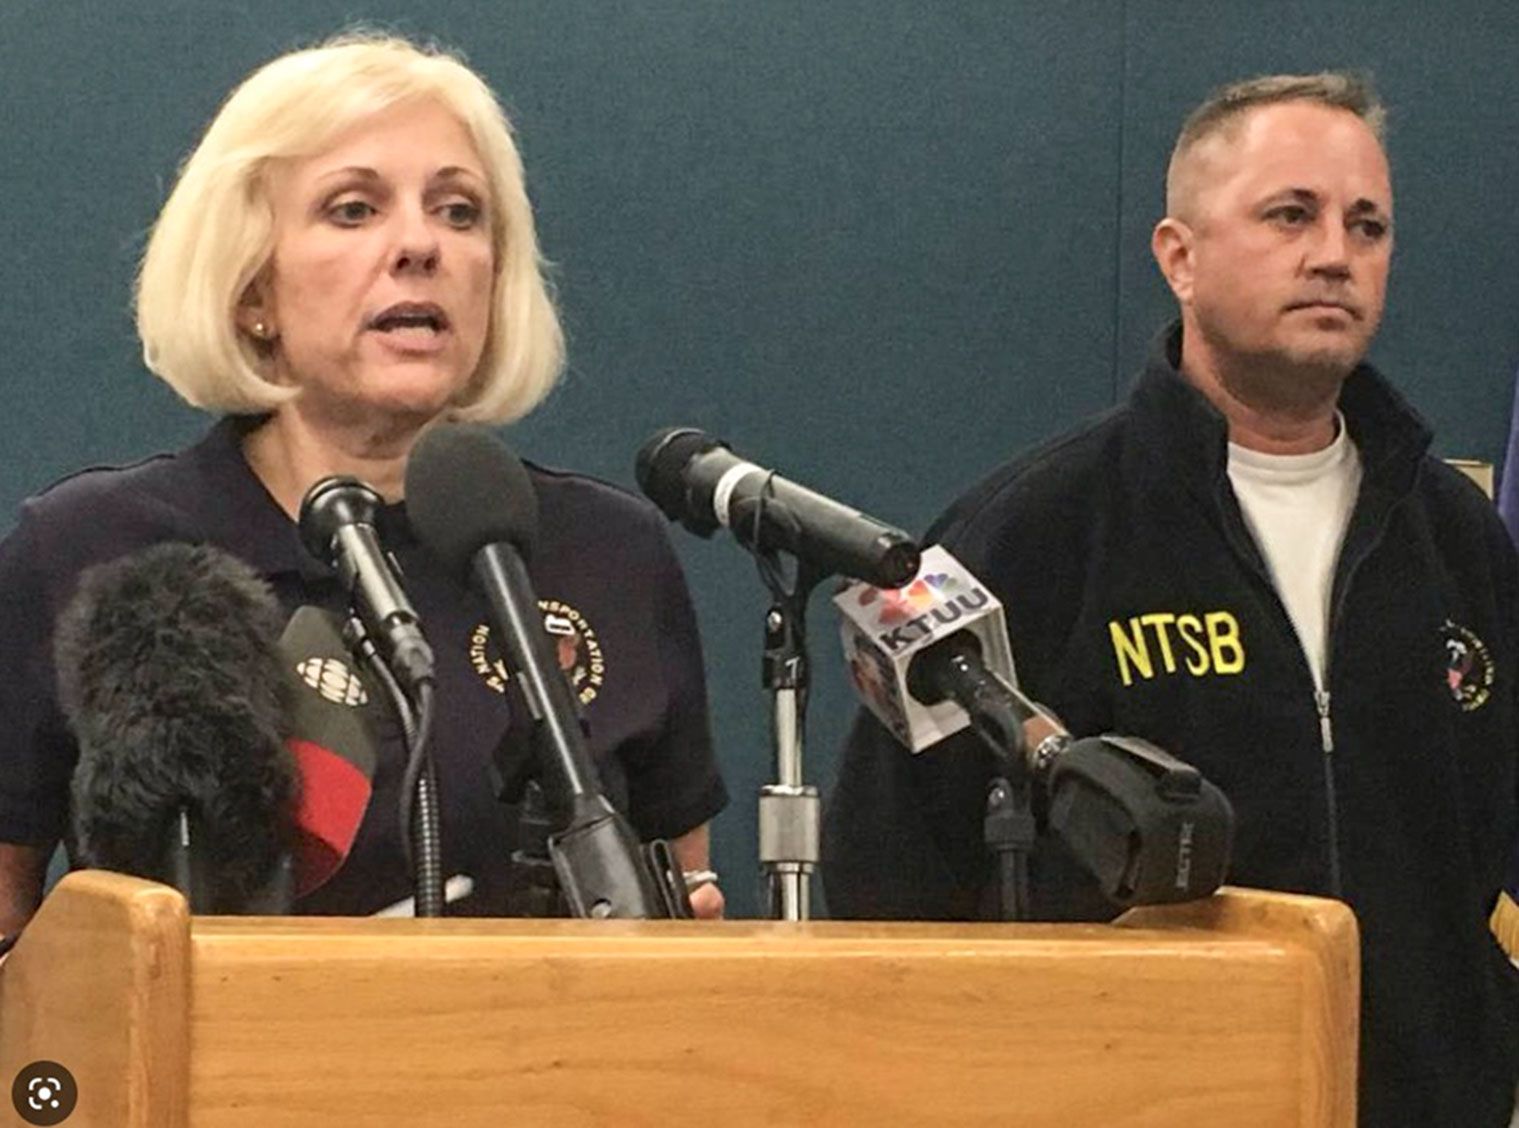 Jennifer Homendy, head of NTSB, speaking at a podium with many microphones, and with Aaron  on her left